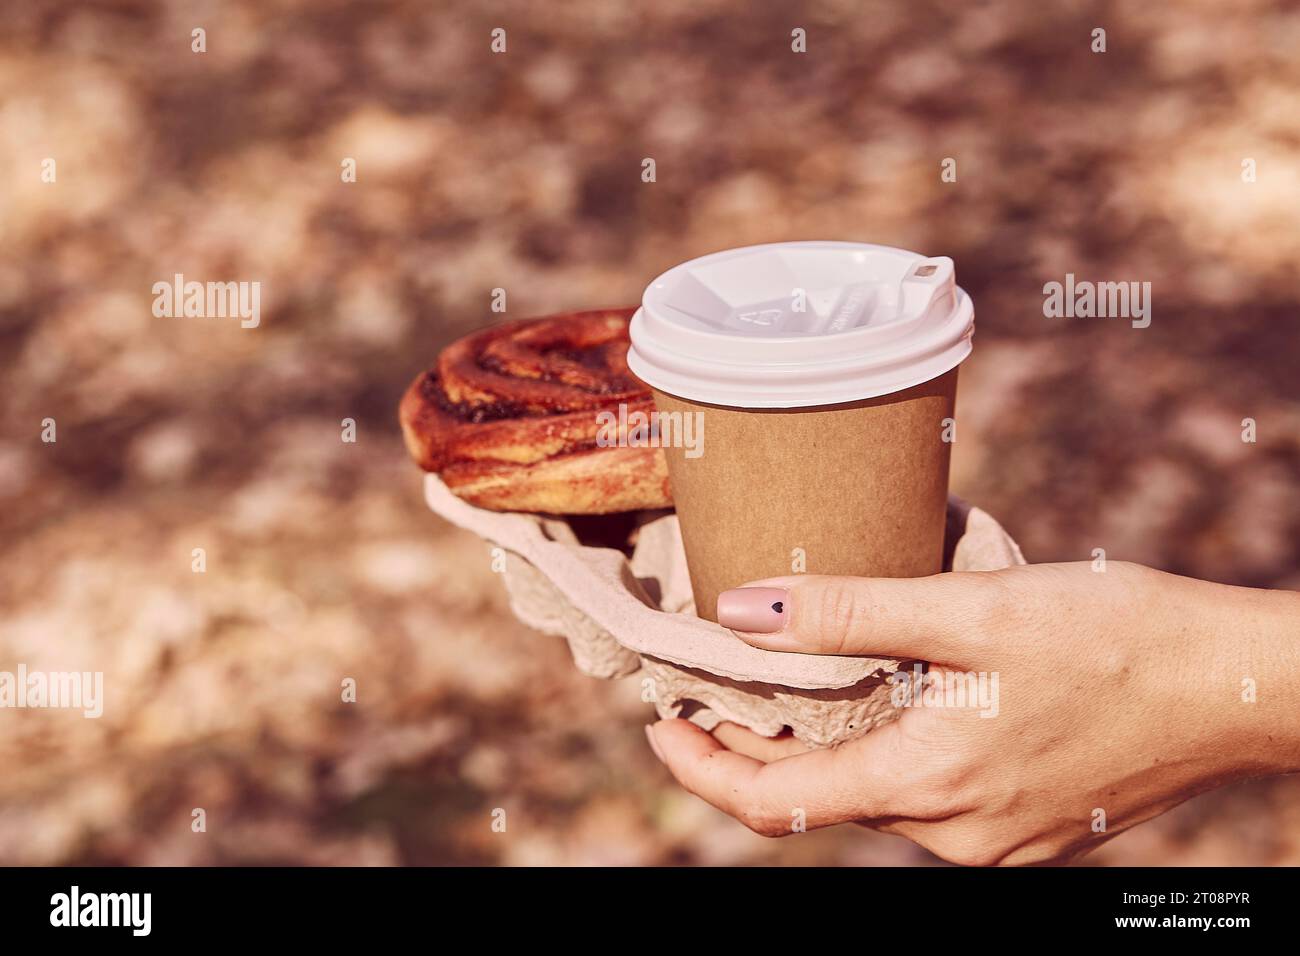 Aesthetic autumn breakfast, walking in the park - Cinnabon bun with coffee ouside. Fall picnic. Stock Photo